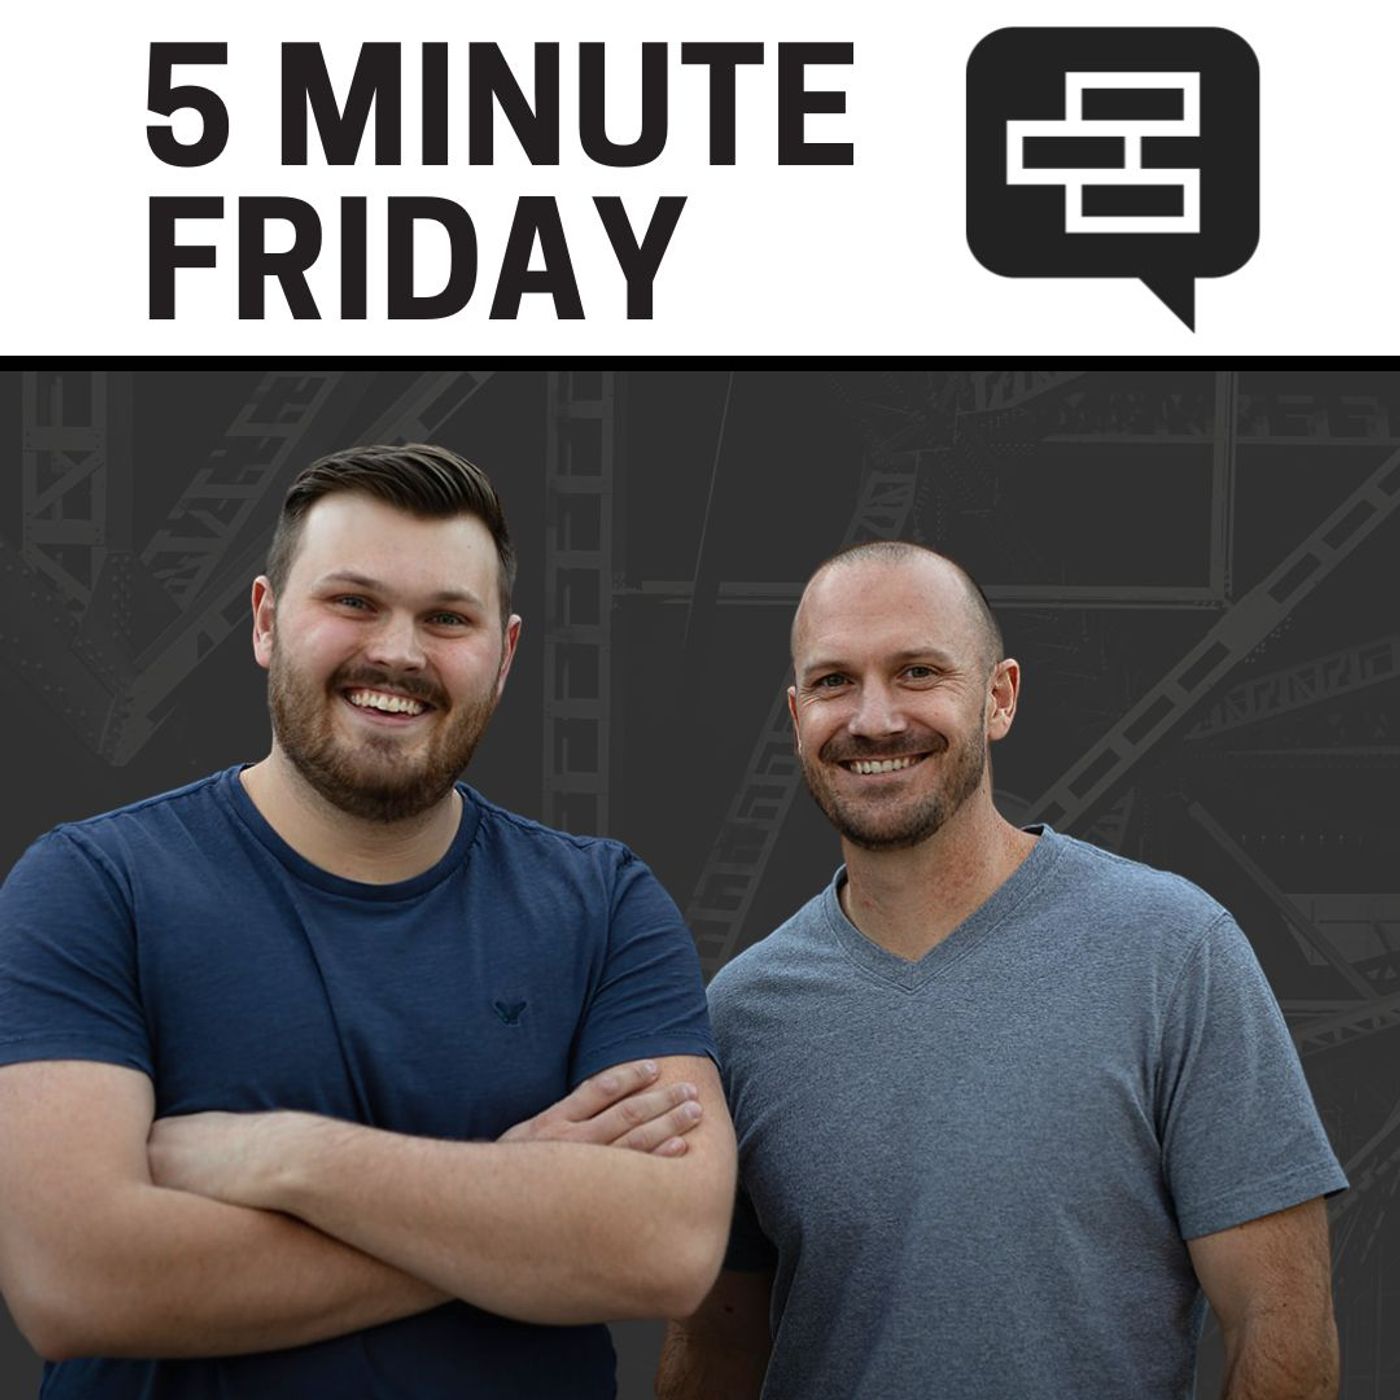 How to Deal with Conflict | 5 Minute Friday